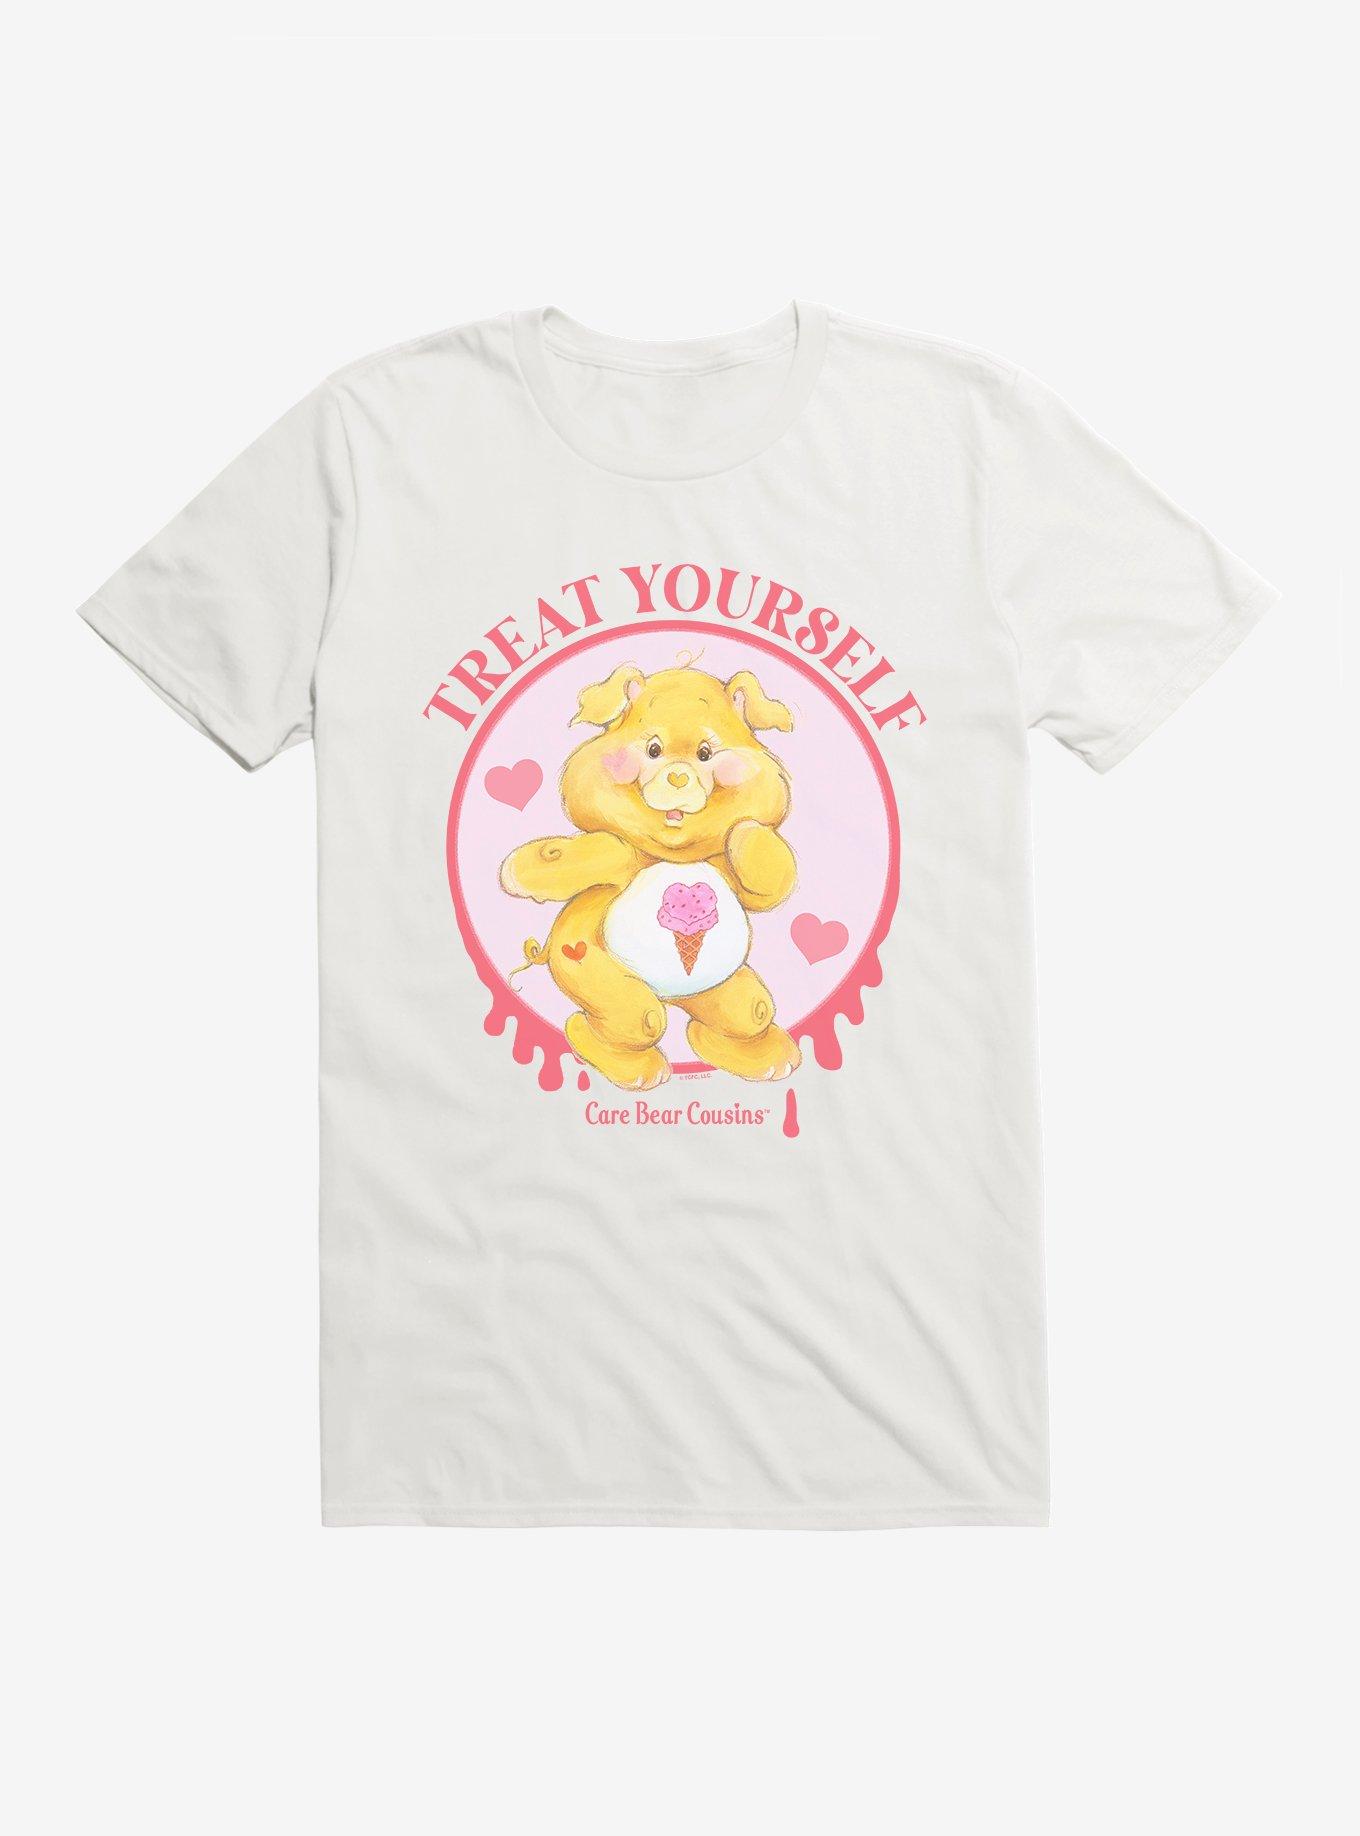 Care Bear Cousins Treat Heart Pig Treat Yourself T-Shirt, WHITE, hi-res